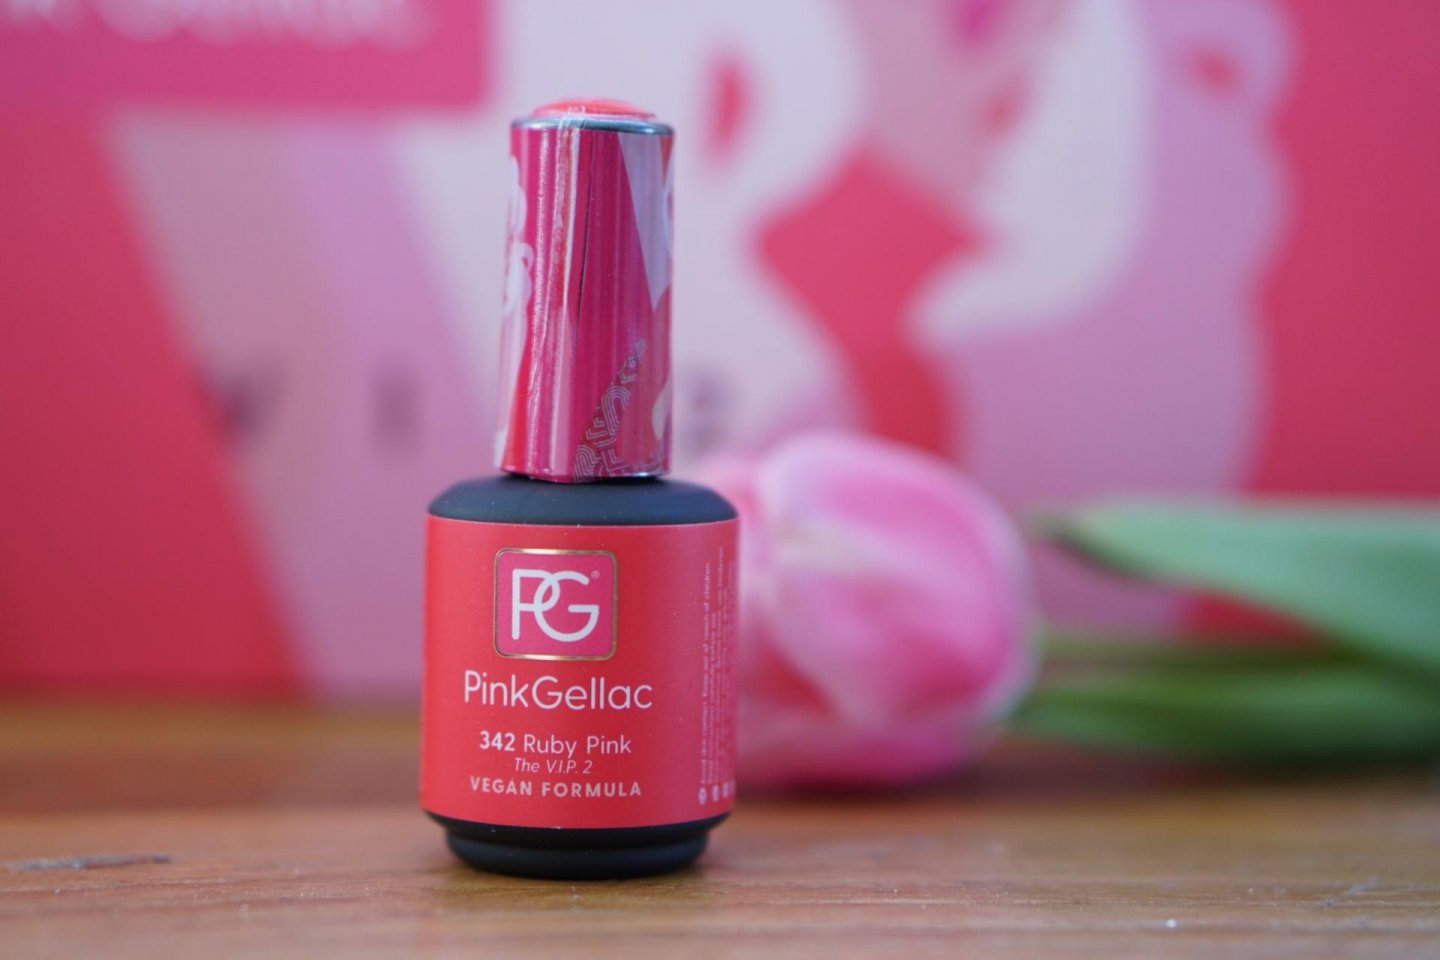 pink gellac 342 Ruby Pink swatches